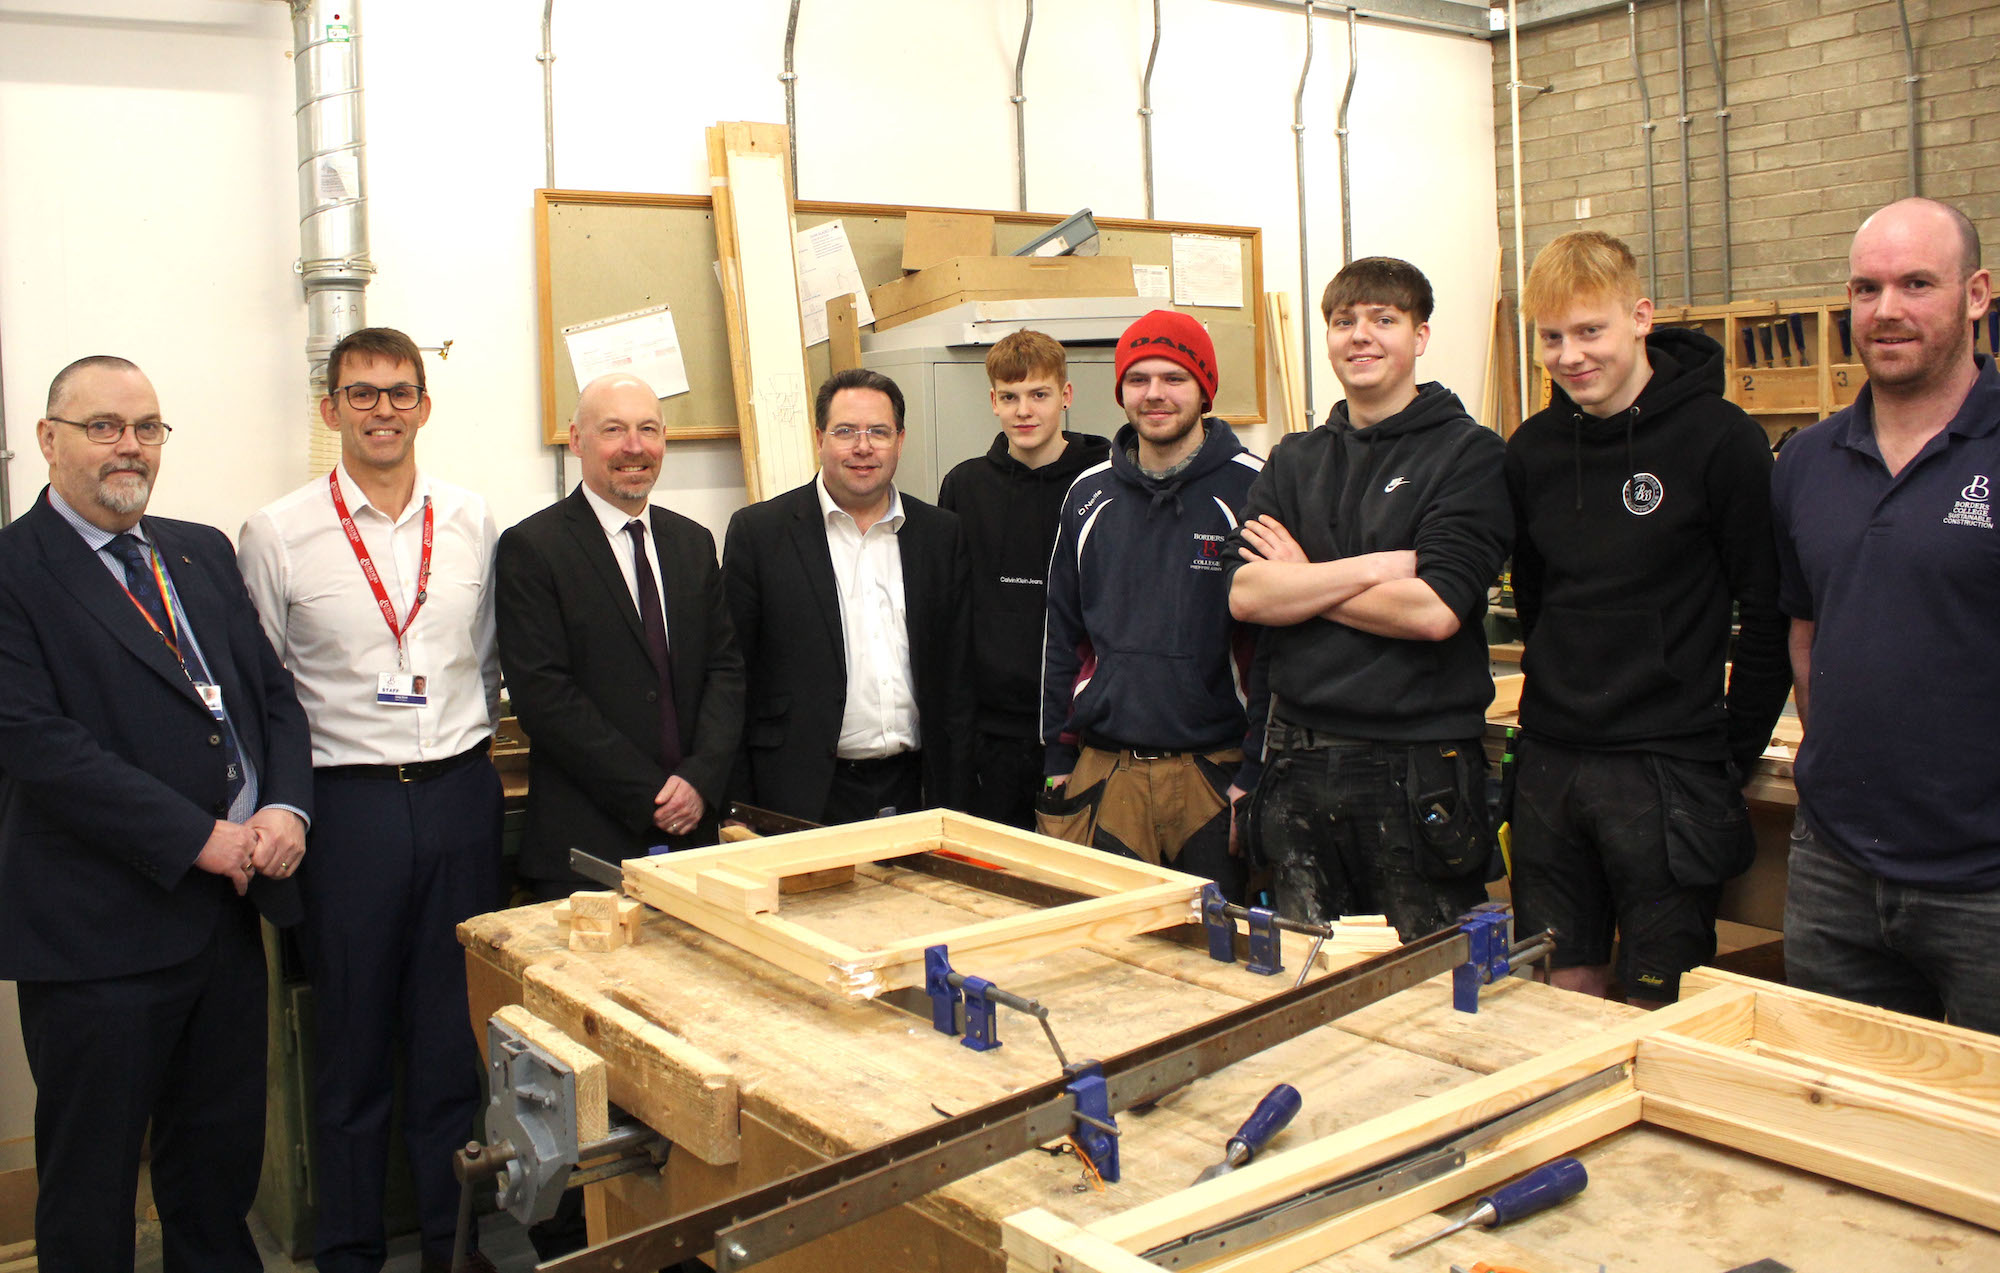 Group of staff and students, along with MSP Craig Hoy, standing in carpentry workshop